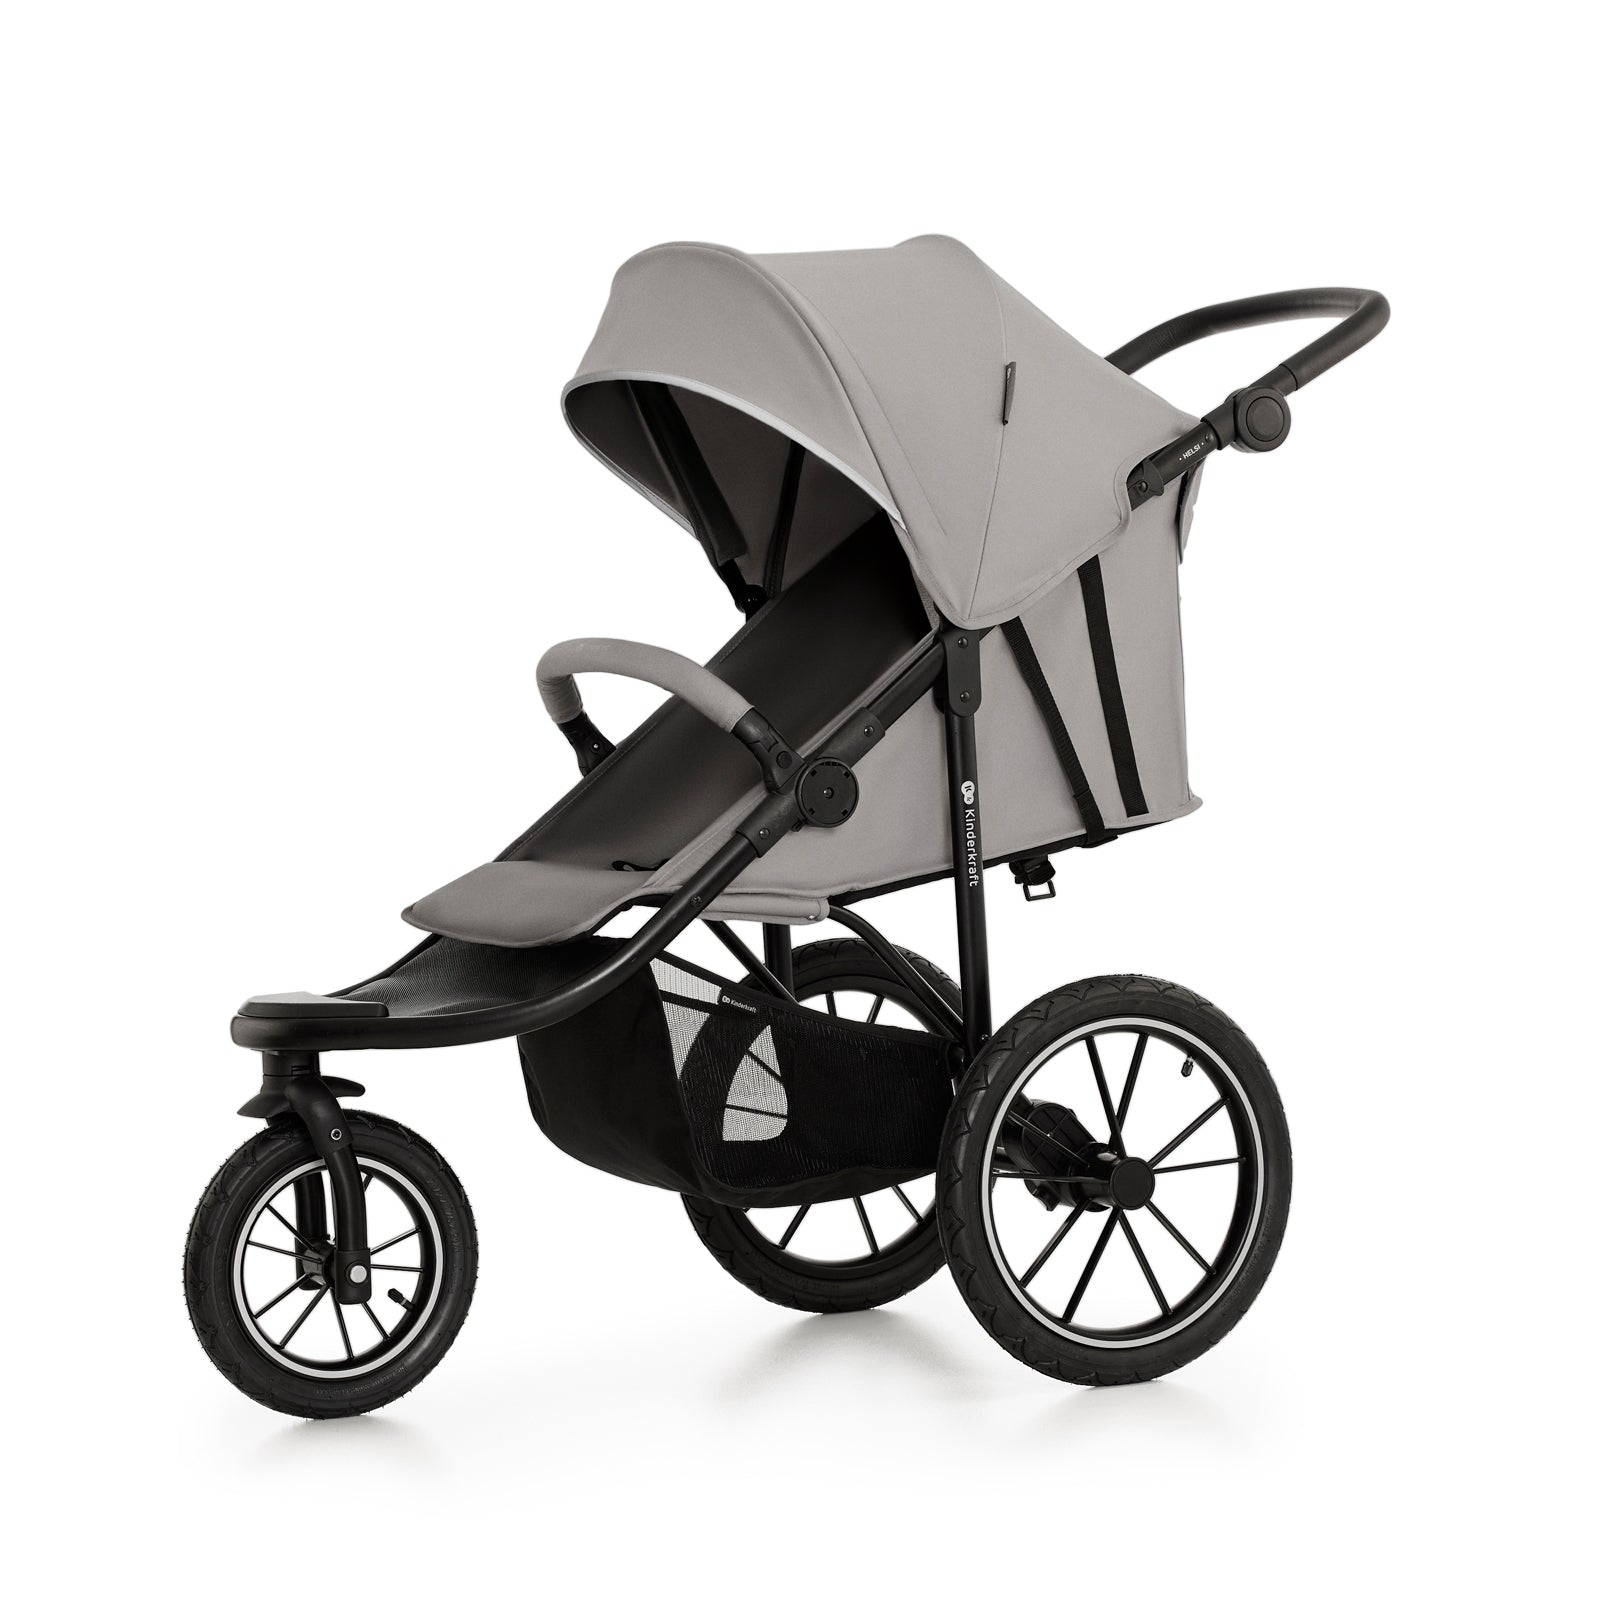 The Kinderkraft NUBI 2 is becoming a really popular choice for